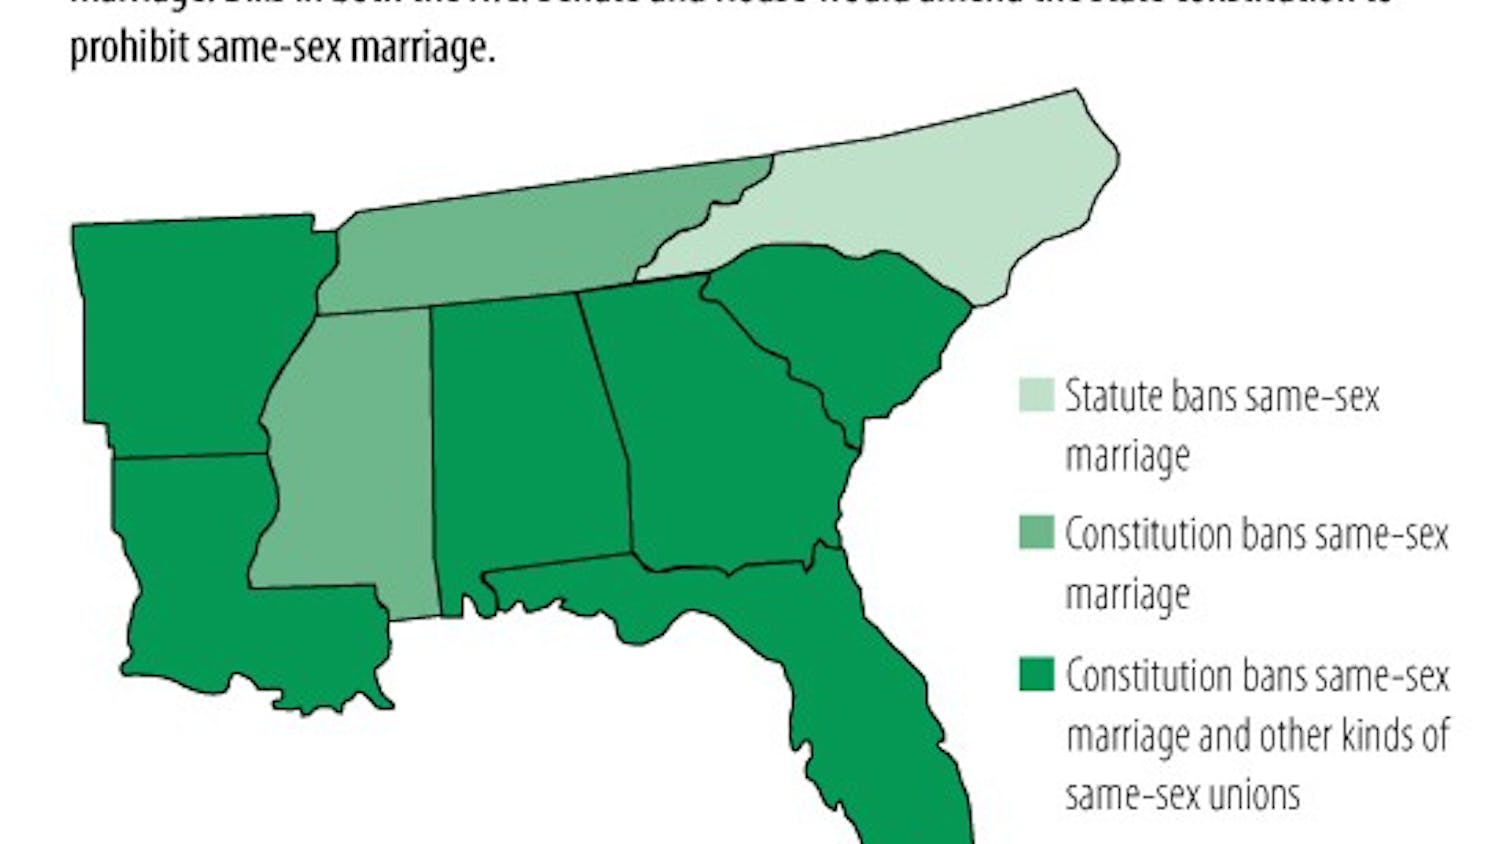 Graphic: New bills in state legislature seek to constitutionally define marriage (Cece Pascual)